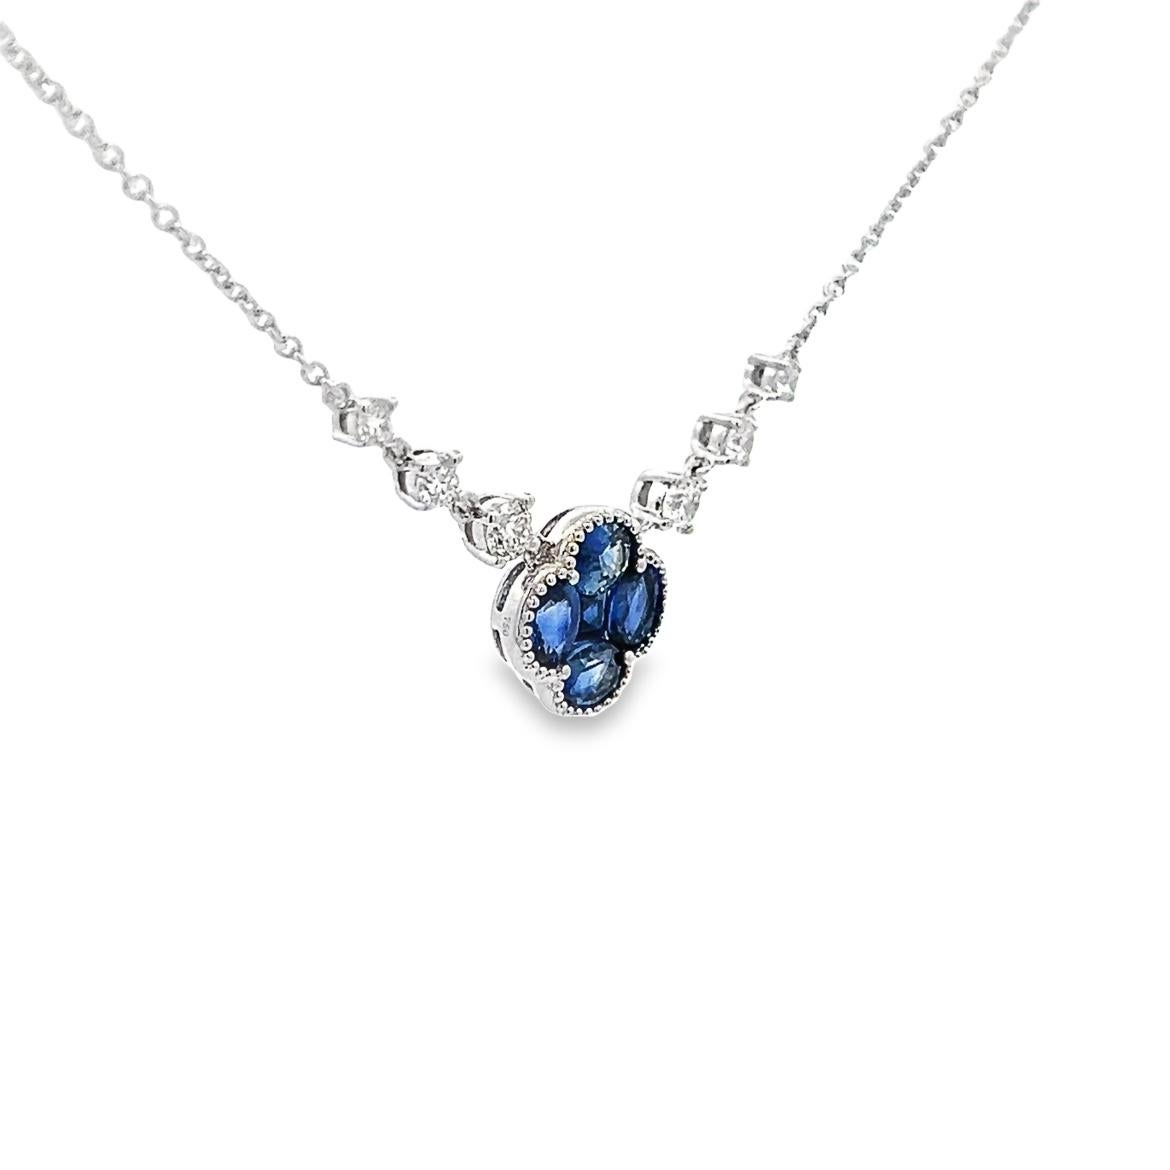 Looking for a unique and unforgettable gift? Look no further! This exquisite Blue Sapphire flower, accented with small Diamonds, is set in 18k white gold with an adjustable sizing lock and is perfect for any special occasion. Whether it's an